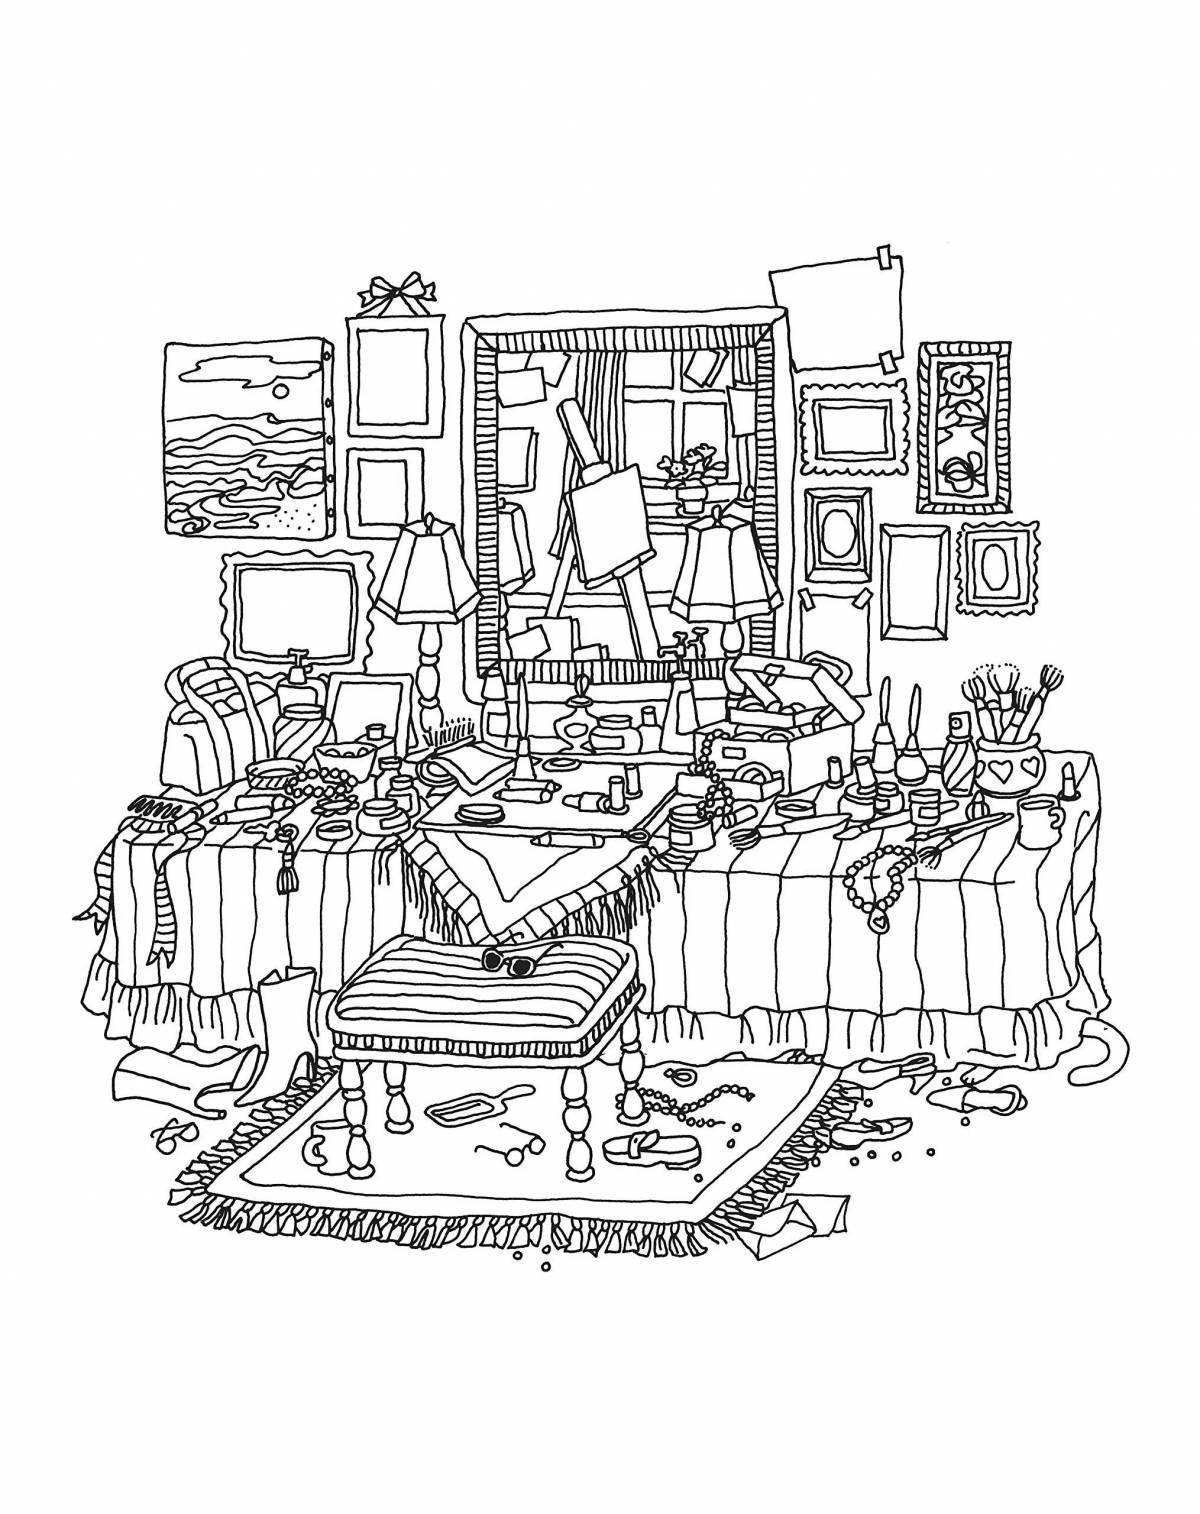 Generous creative chaos coloring page